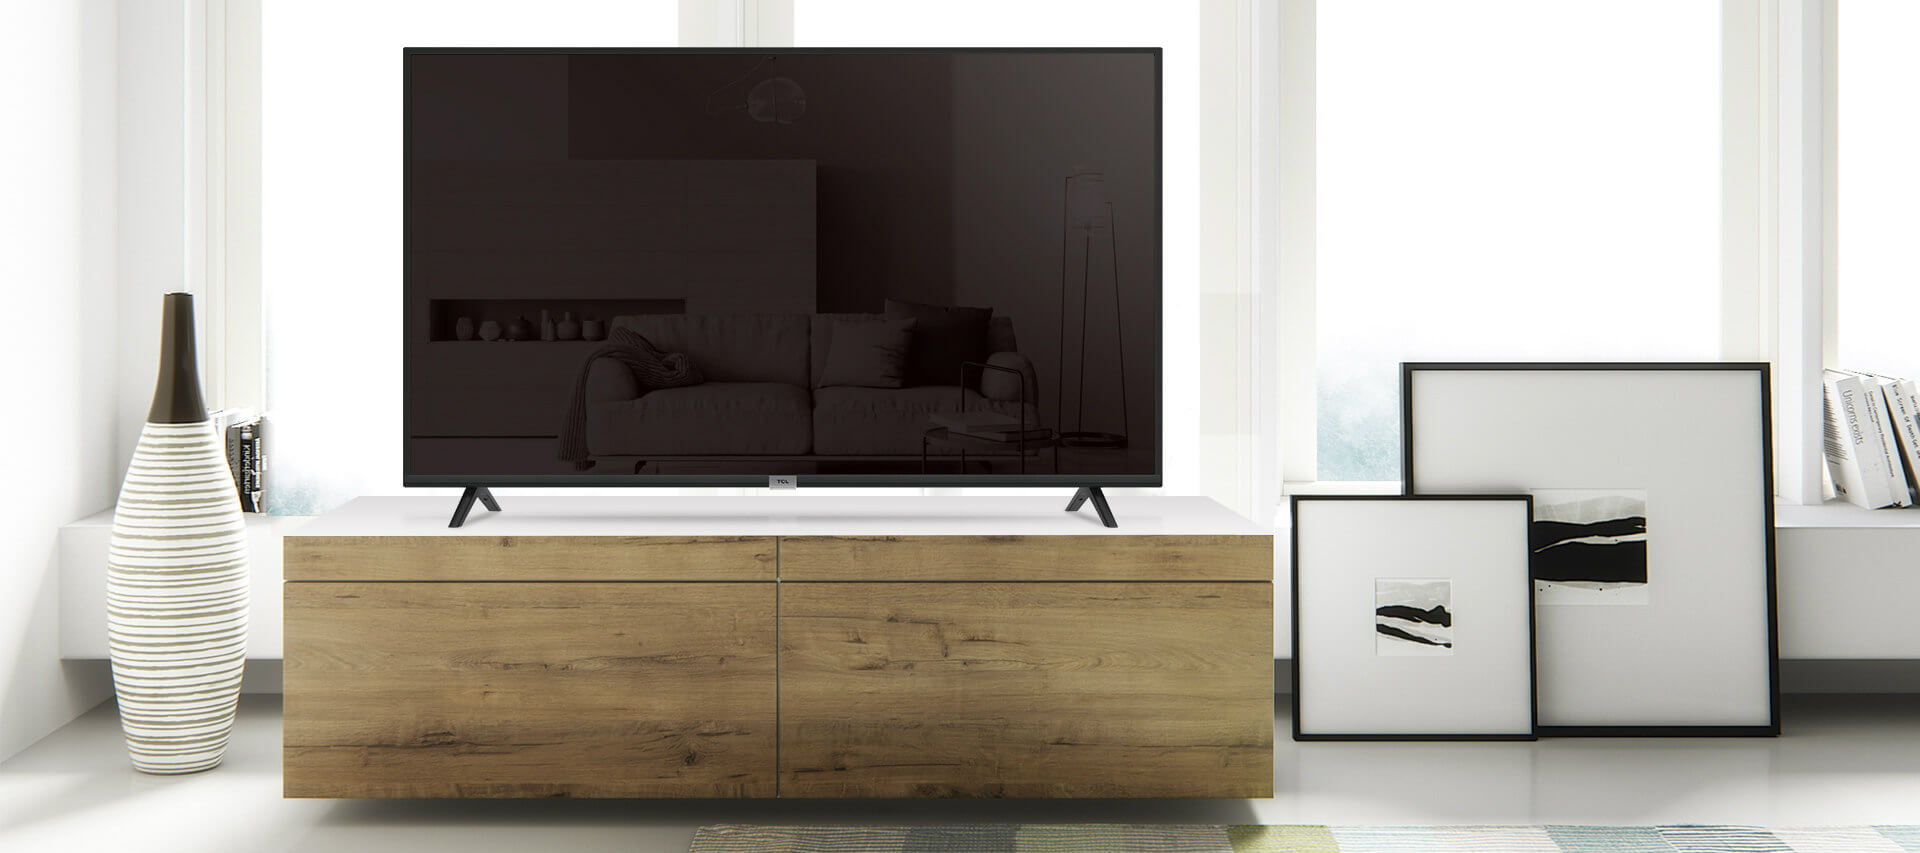 TCL Android tv S6500A at home